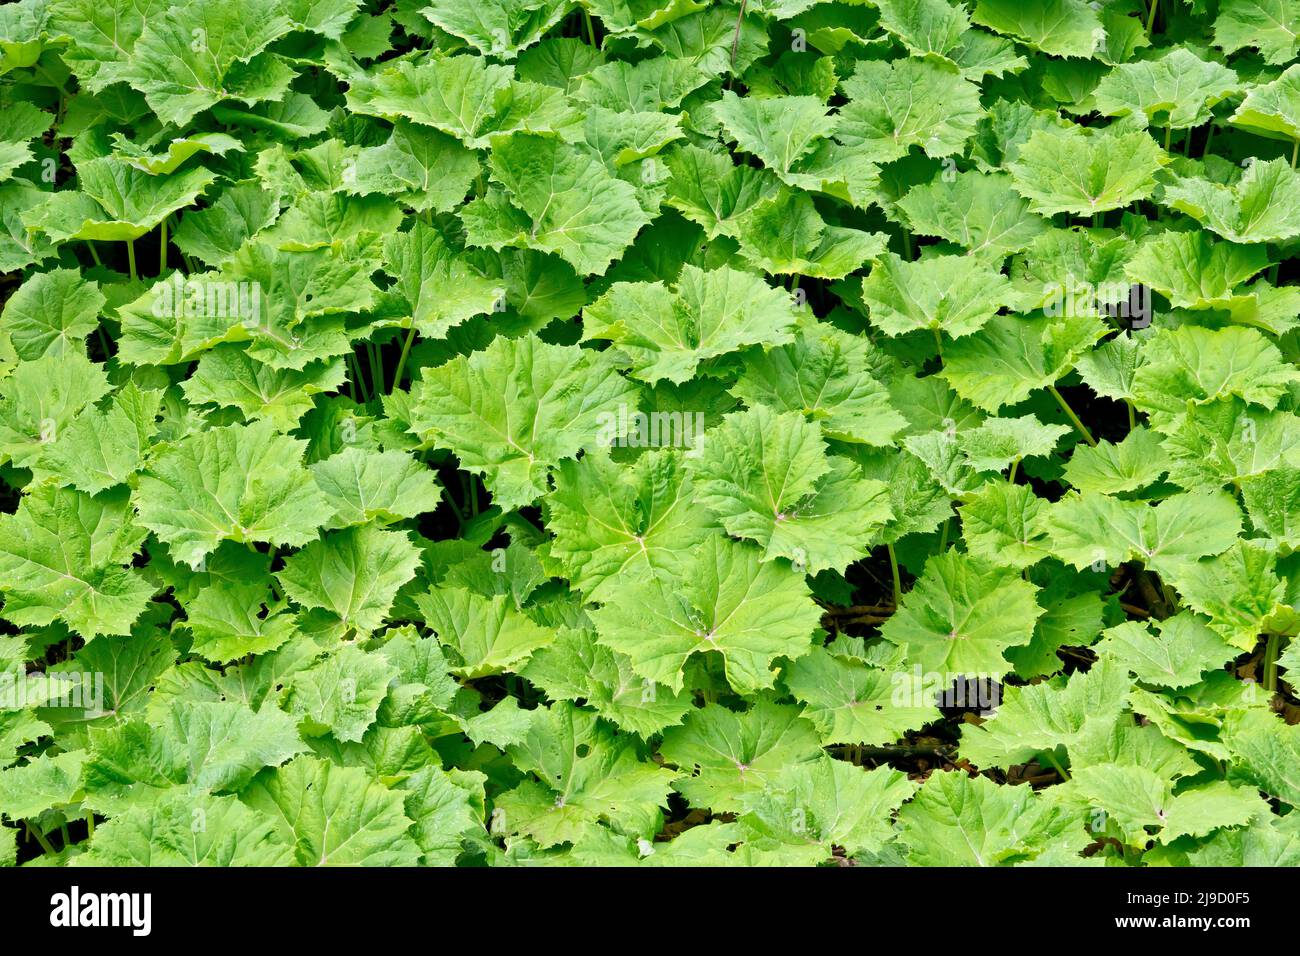 White Butterbur (petasites albus), close up of a dense patch of the large circular leaves that form on the woodland floor after the plant has flowered Stock Photo